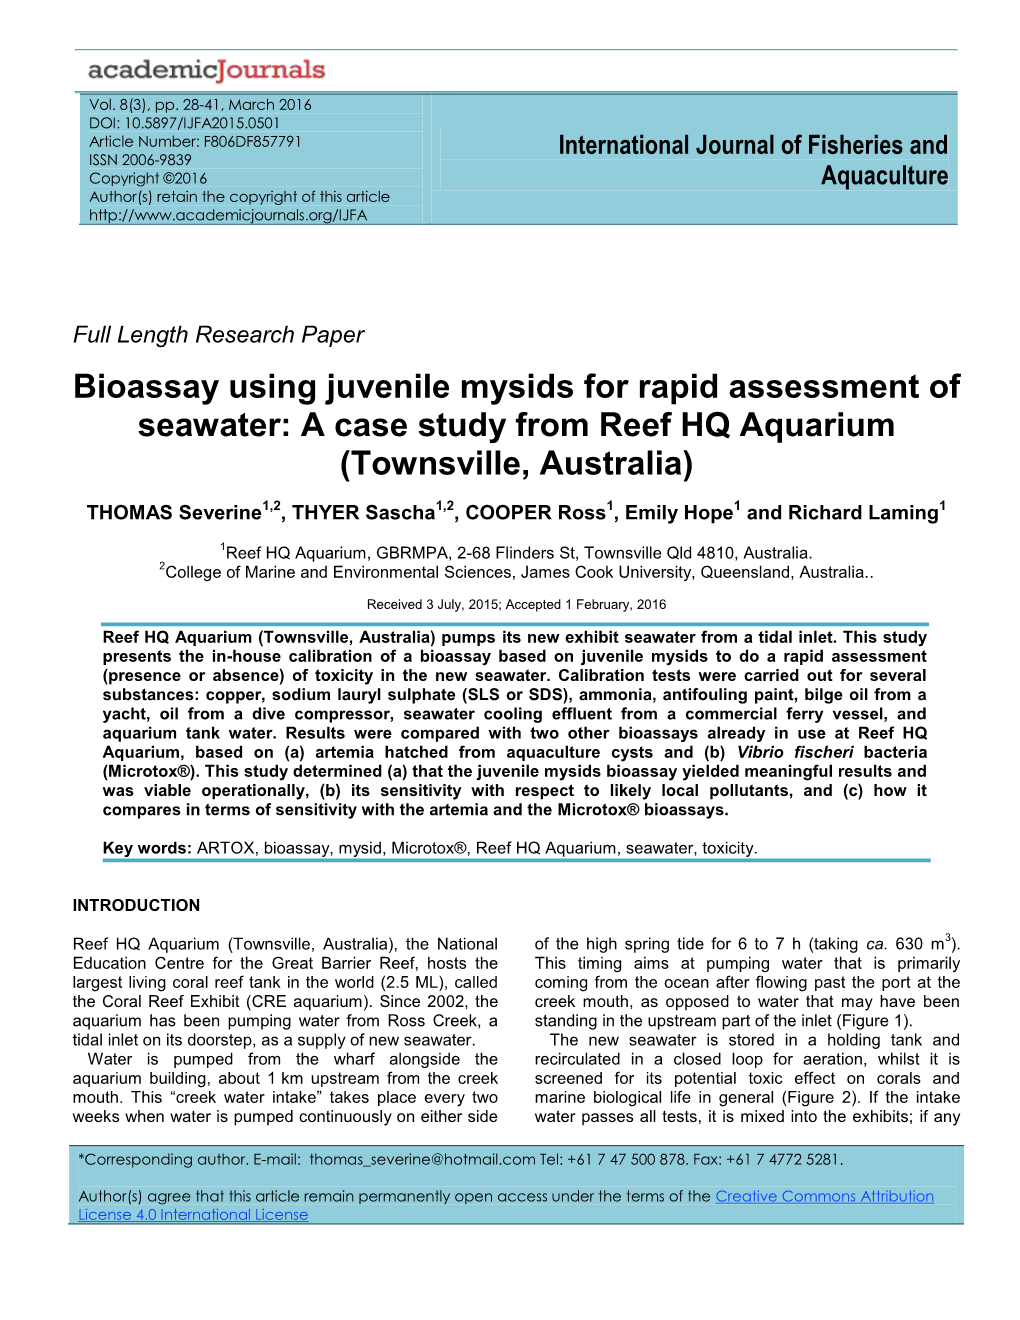 Bioassay Using Juvenile Mysids for Rapid Assessment of Seawater: a Case Study from Reef HQ Aquarium (Townsville, Australia)